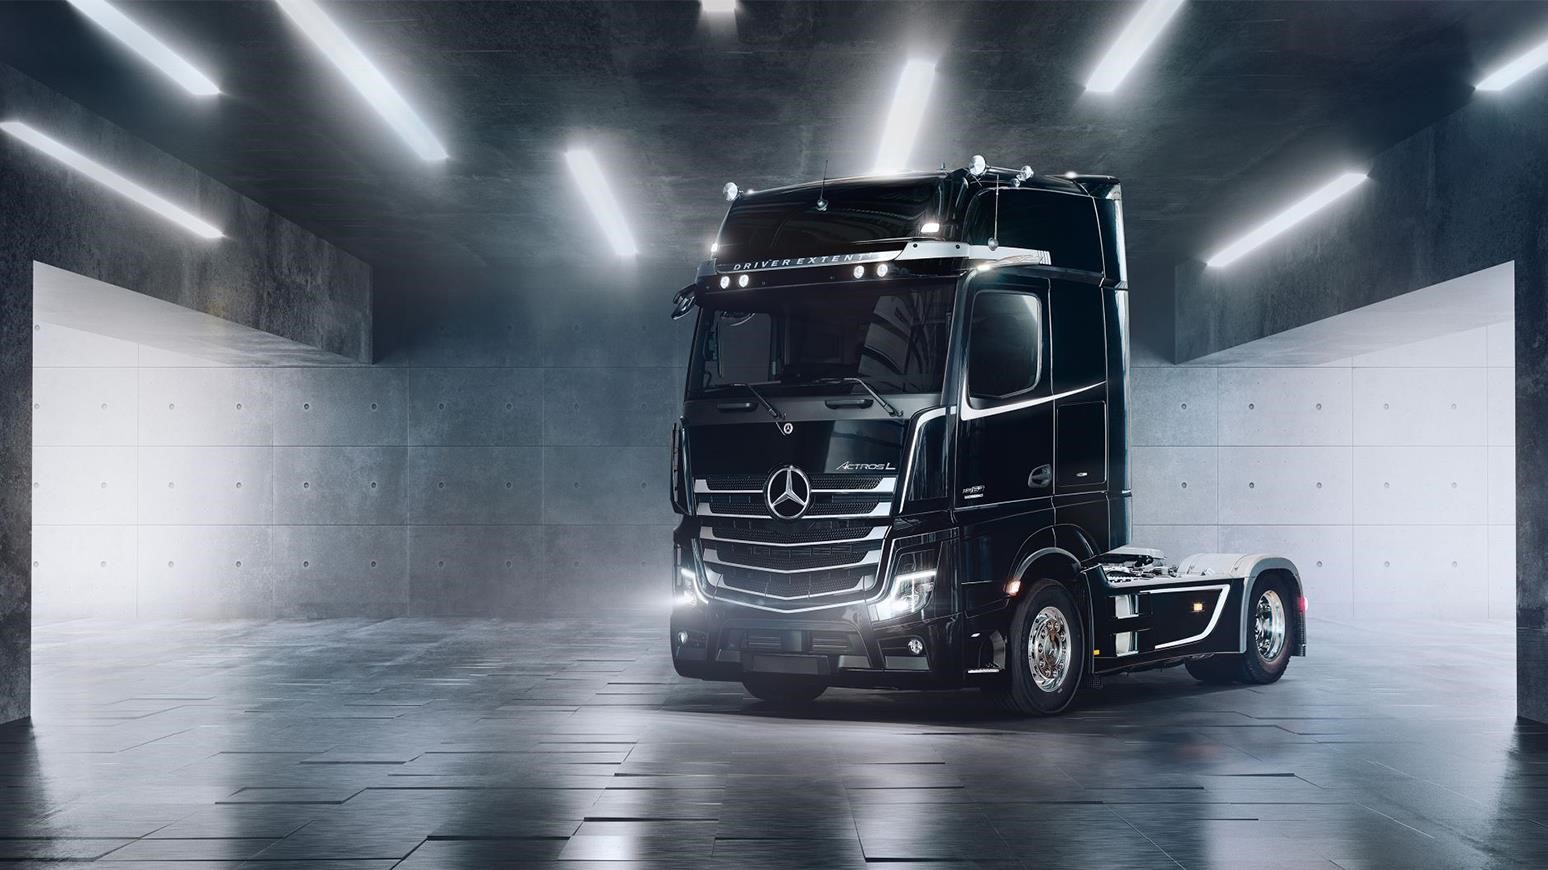 Mercedes-Benz Actros L Driver Extent+ Offers Exclusive Design Inside & Out